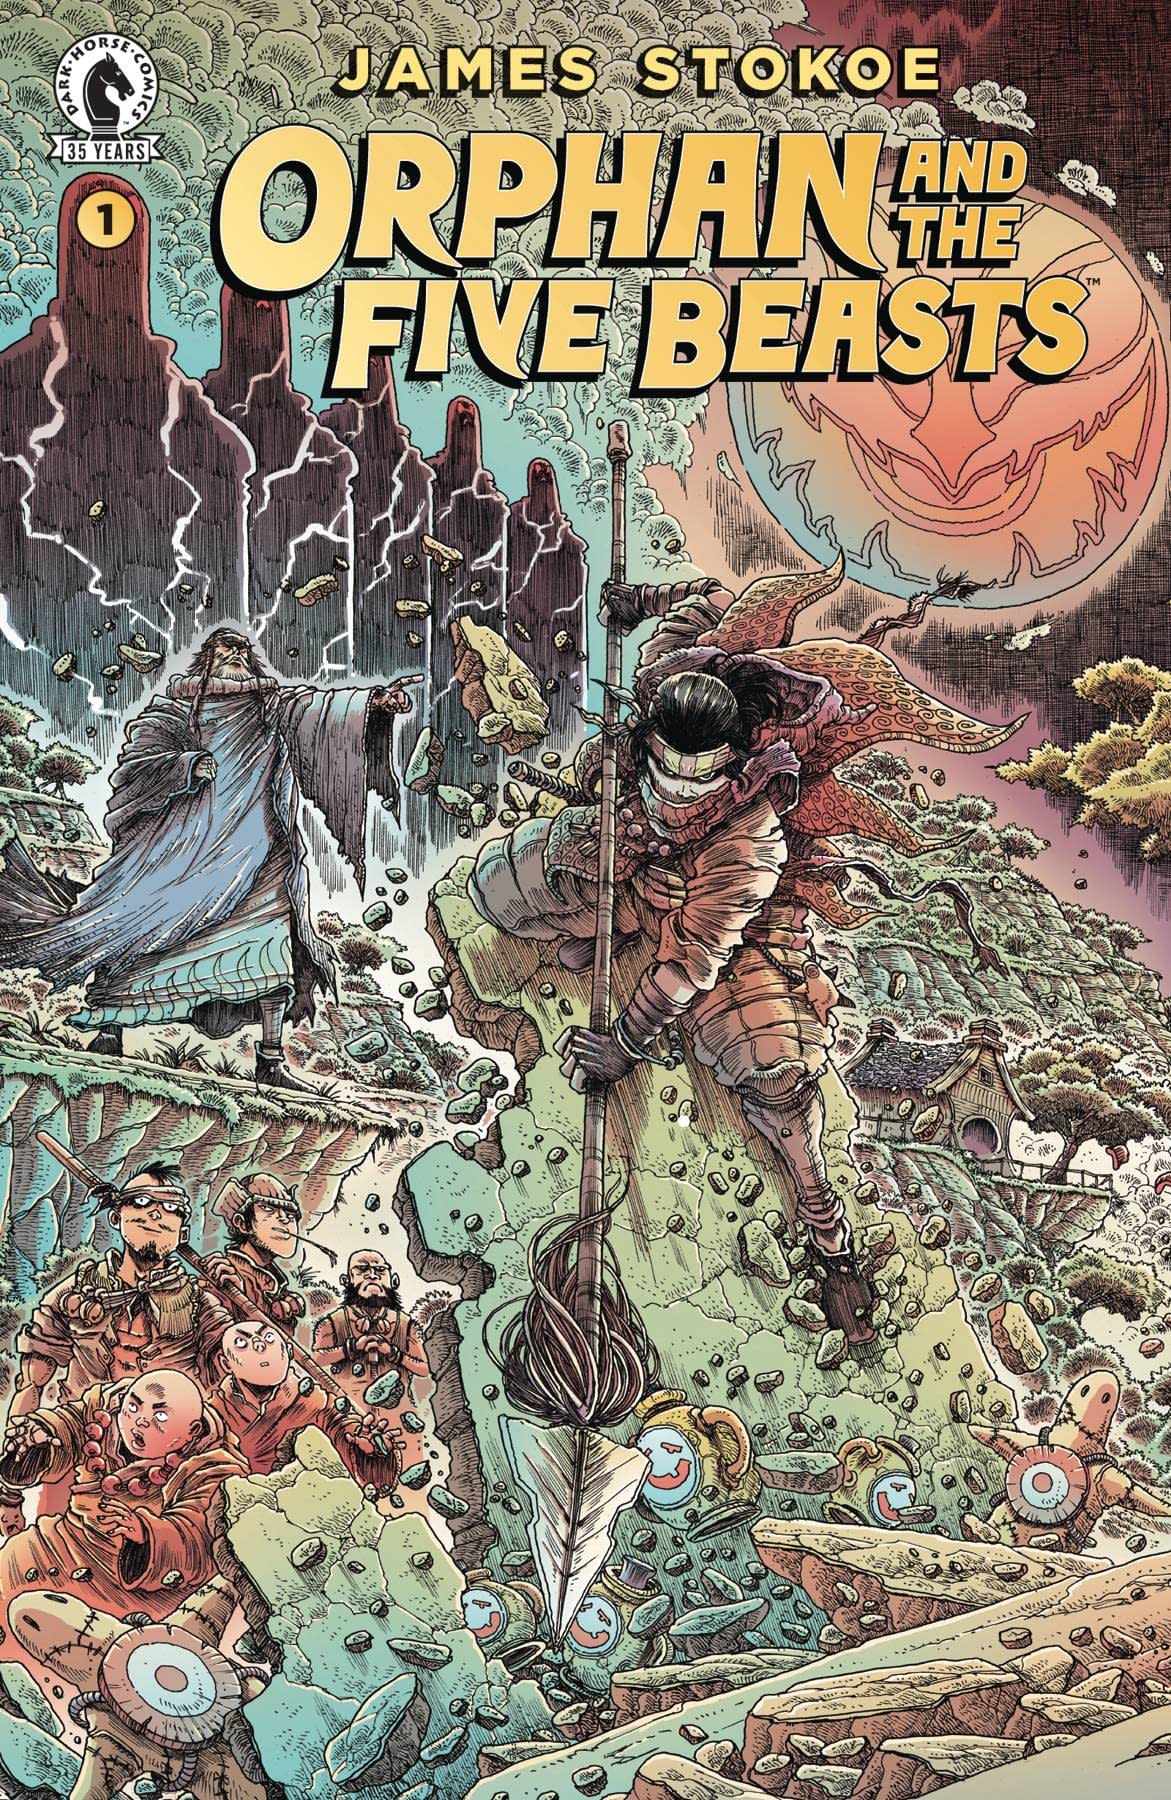 Dark Horse Comics March 2021 Solicitations In Full with James Stokoe ORPHAN & FIVE BEASTS #1 (OF 4)